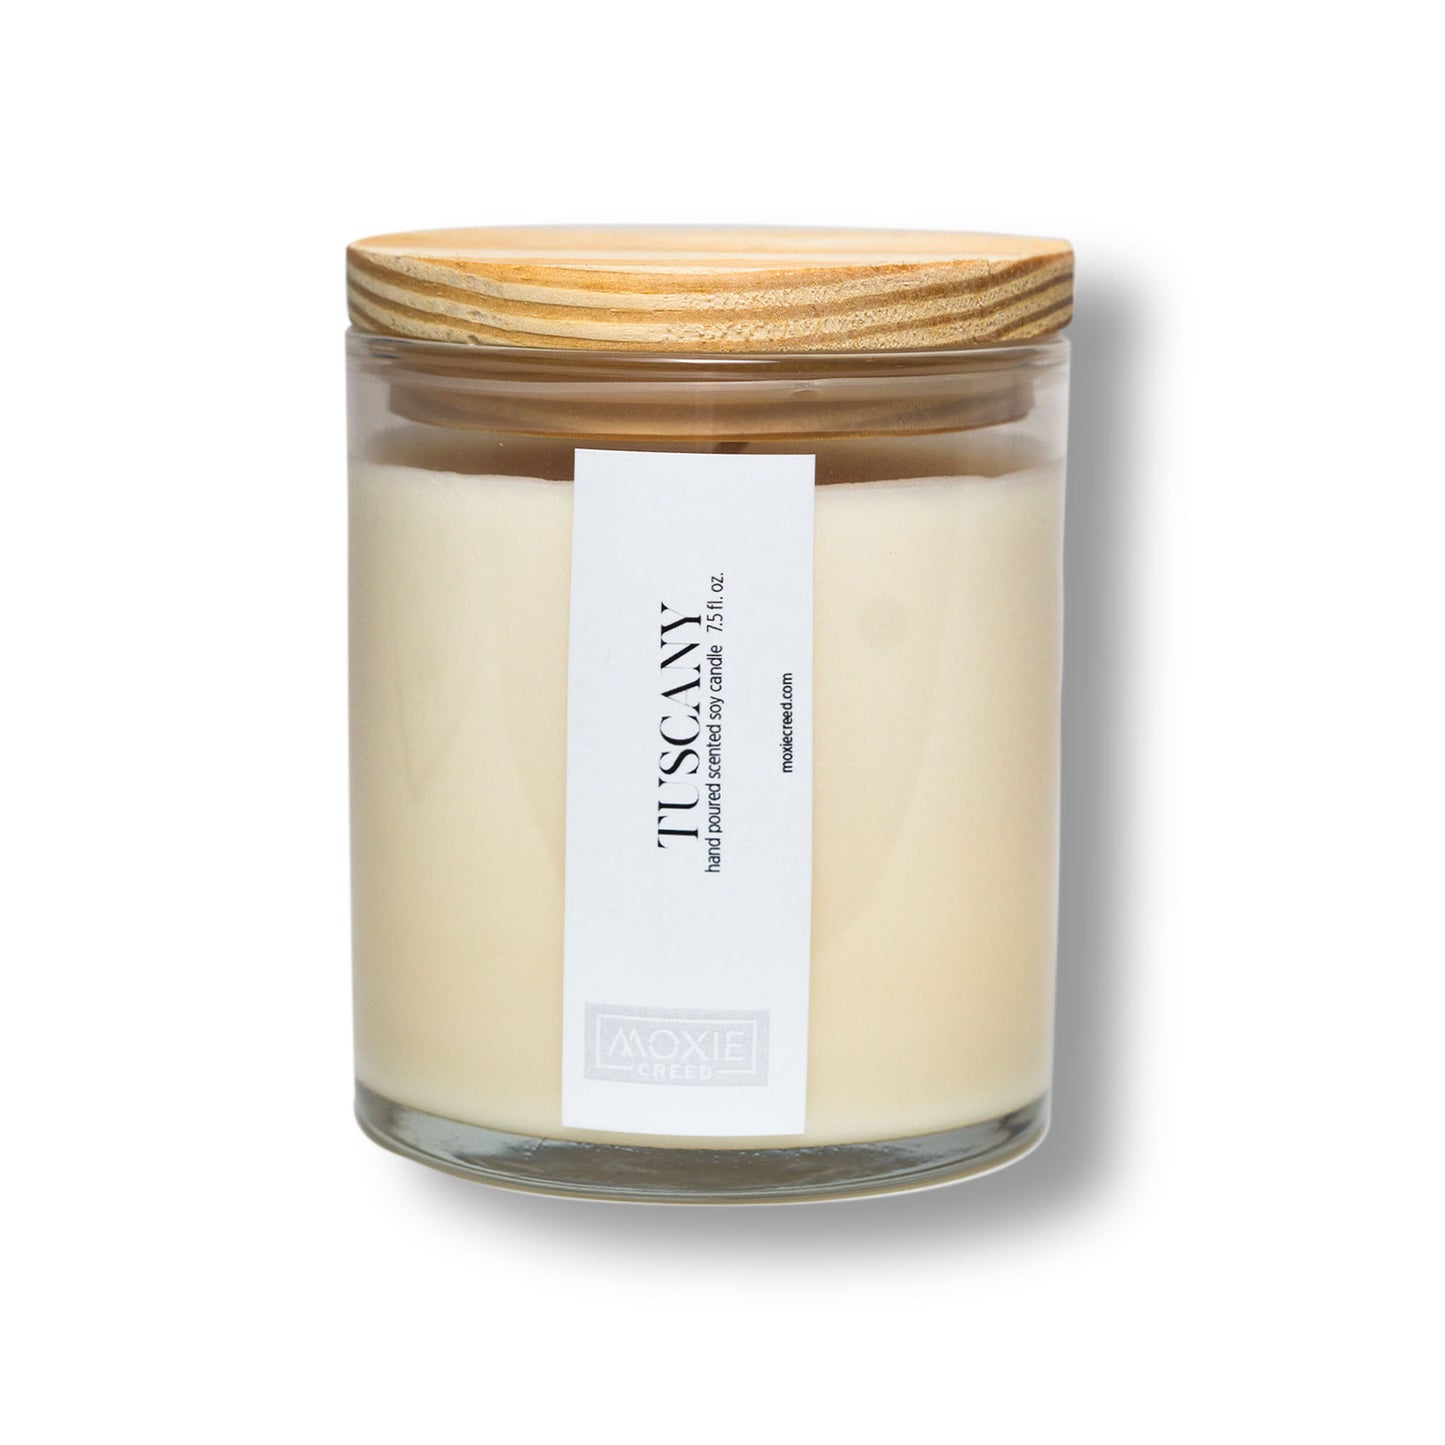 Tuscany Scented Candle